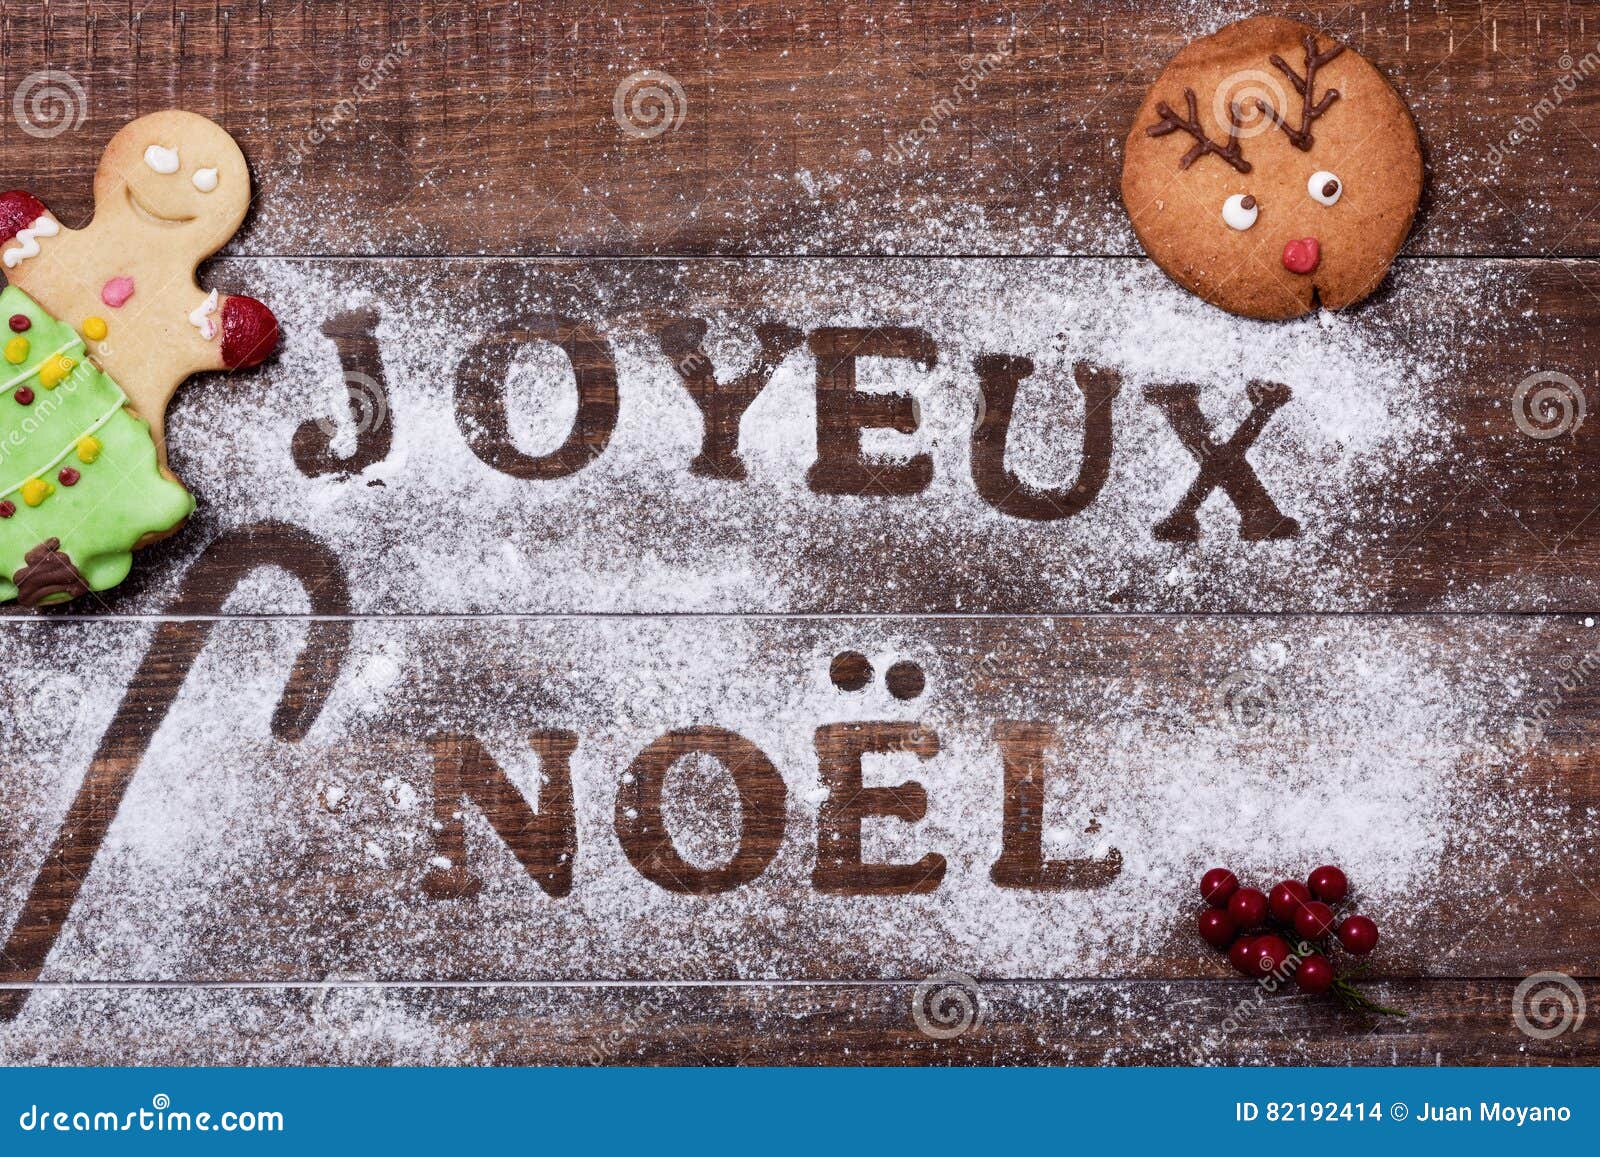 text joyeux noel, merry christmas in french